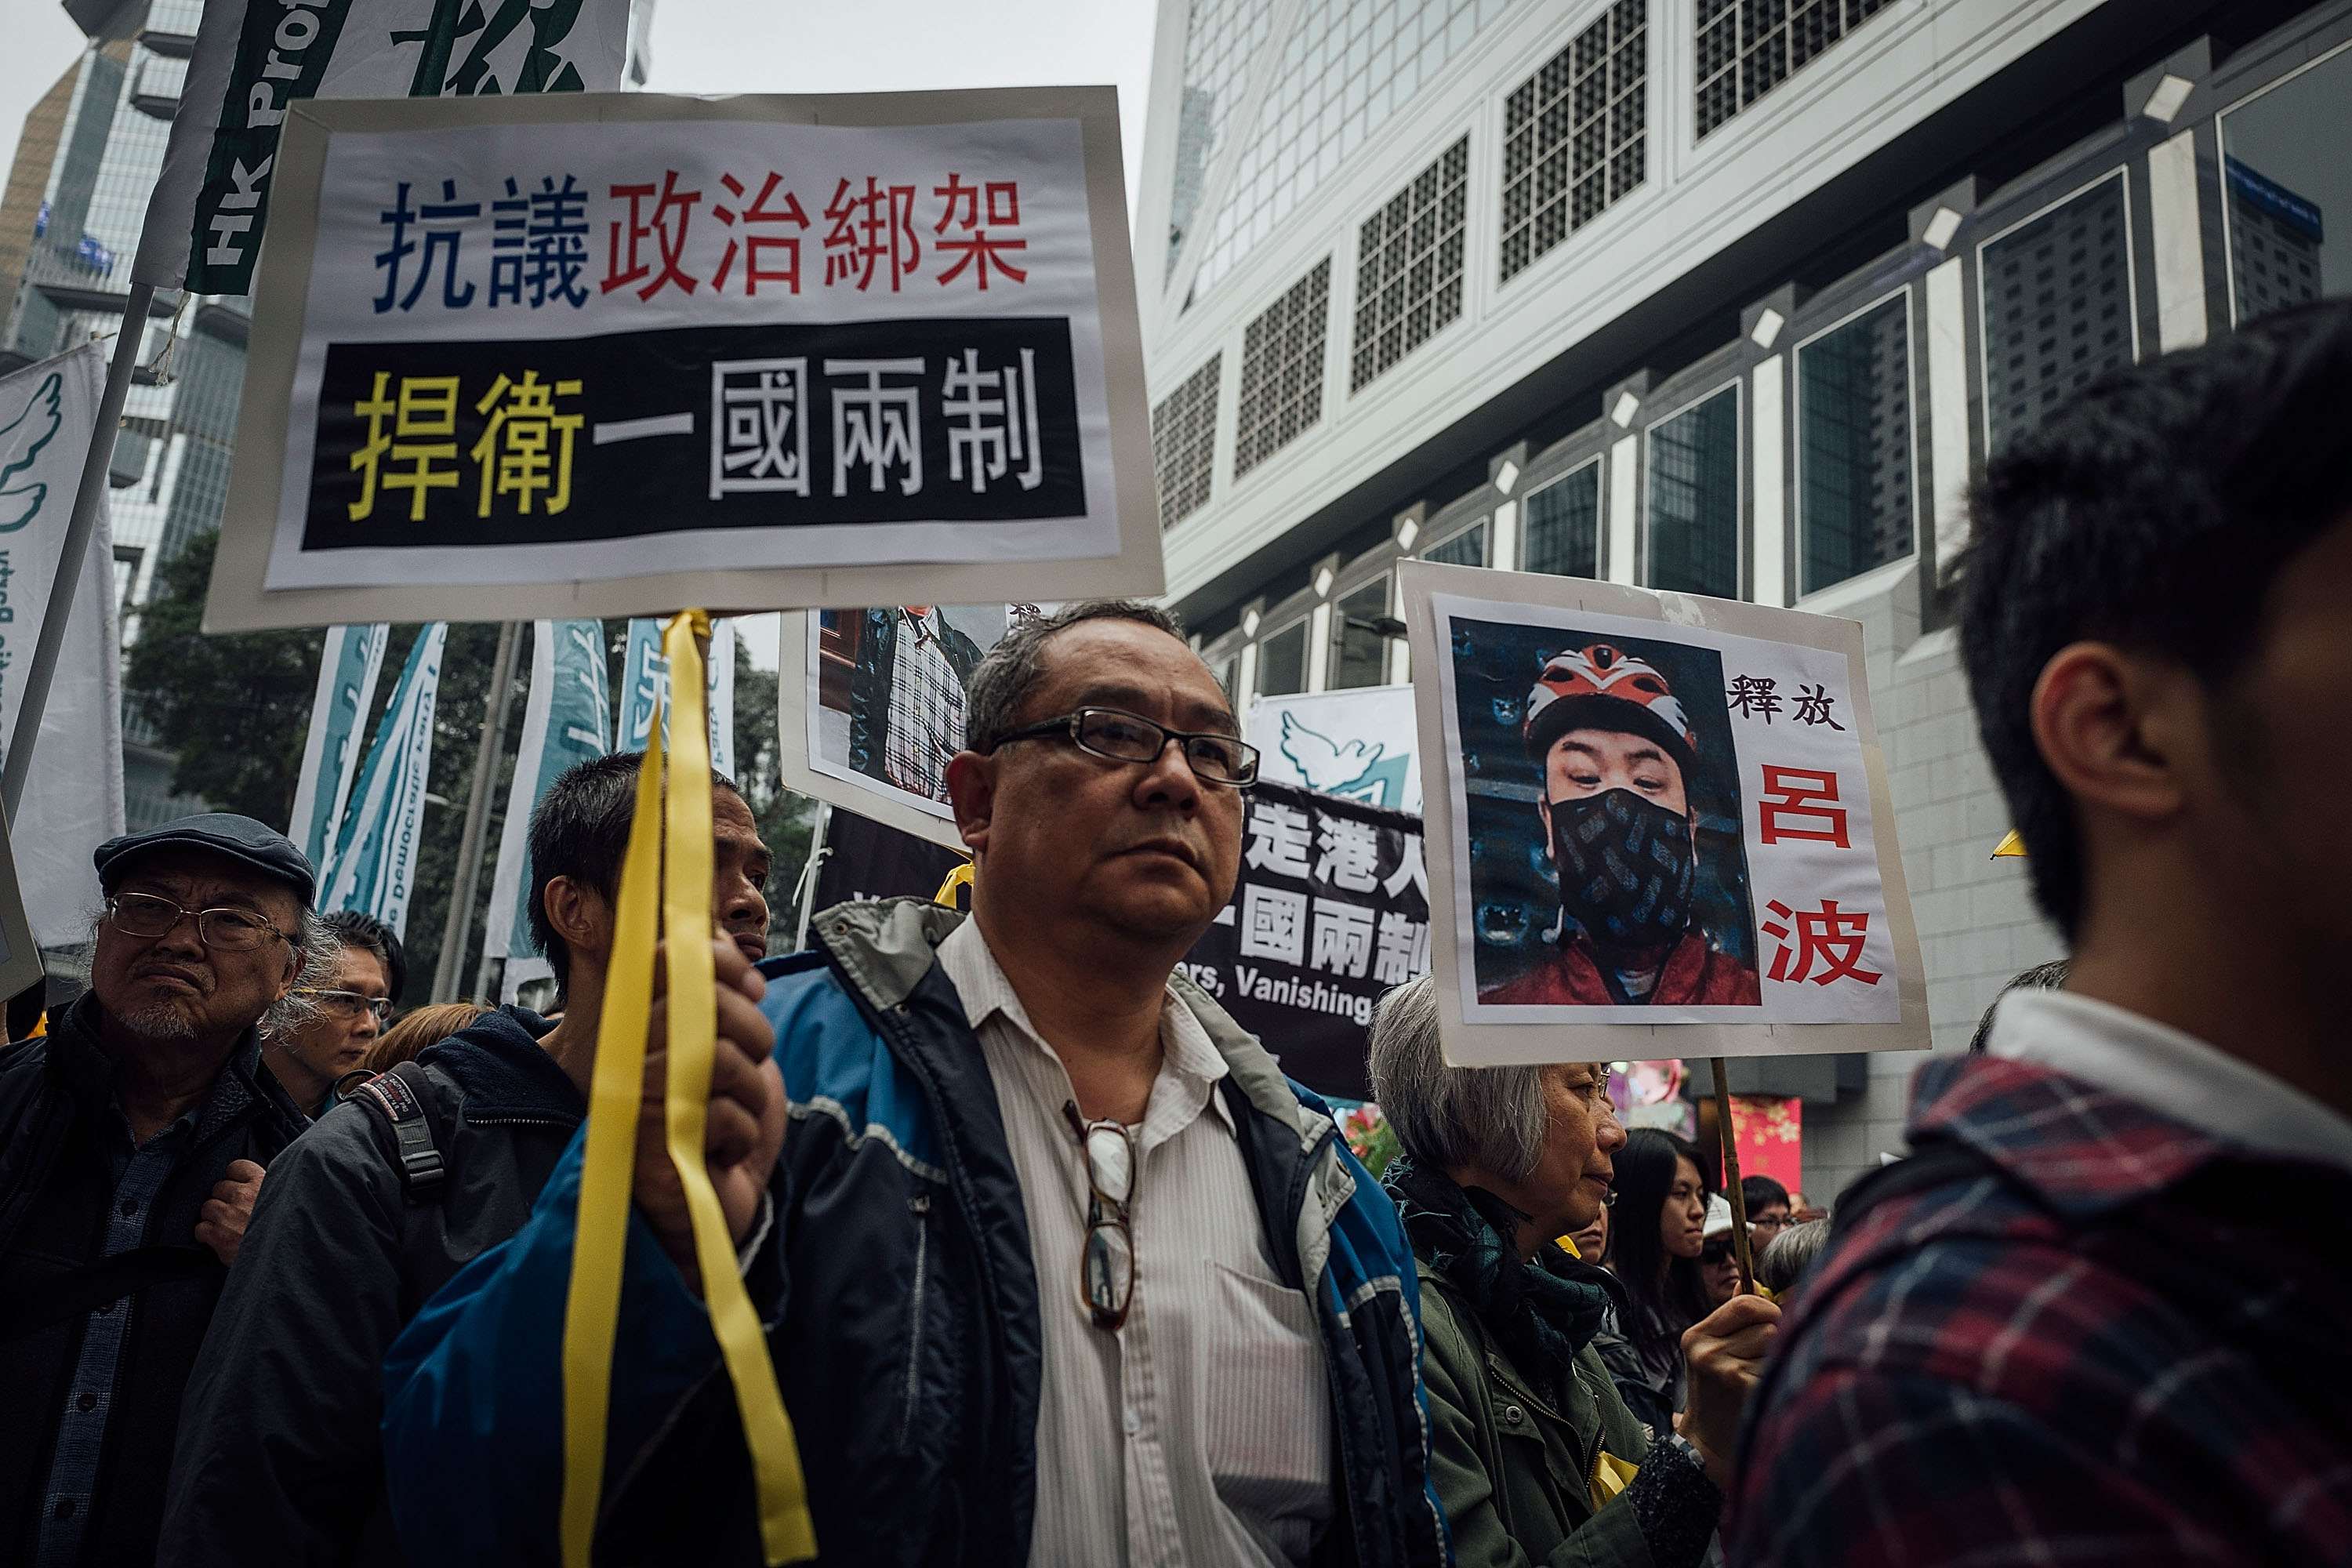 People hold placards and shout slogans as they take part in a rally on a street on Jan. 10, 2016, in Hong Kong. The disappearance of five Hong Kong booksellers, including U.K. passport holder Lee Bo, has sent shivers through Hong Kong as anxiety grows that Chinese control over the city is tightening (Anthony Kwan—Getty Images)